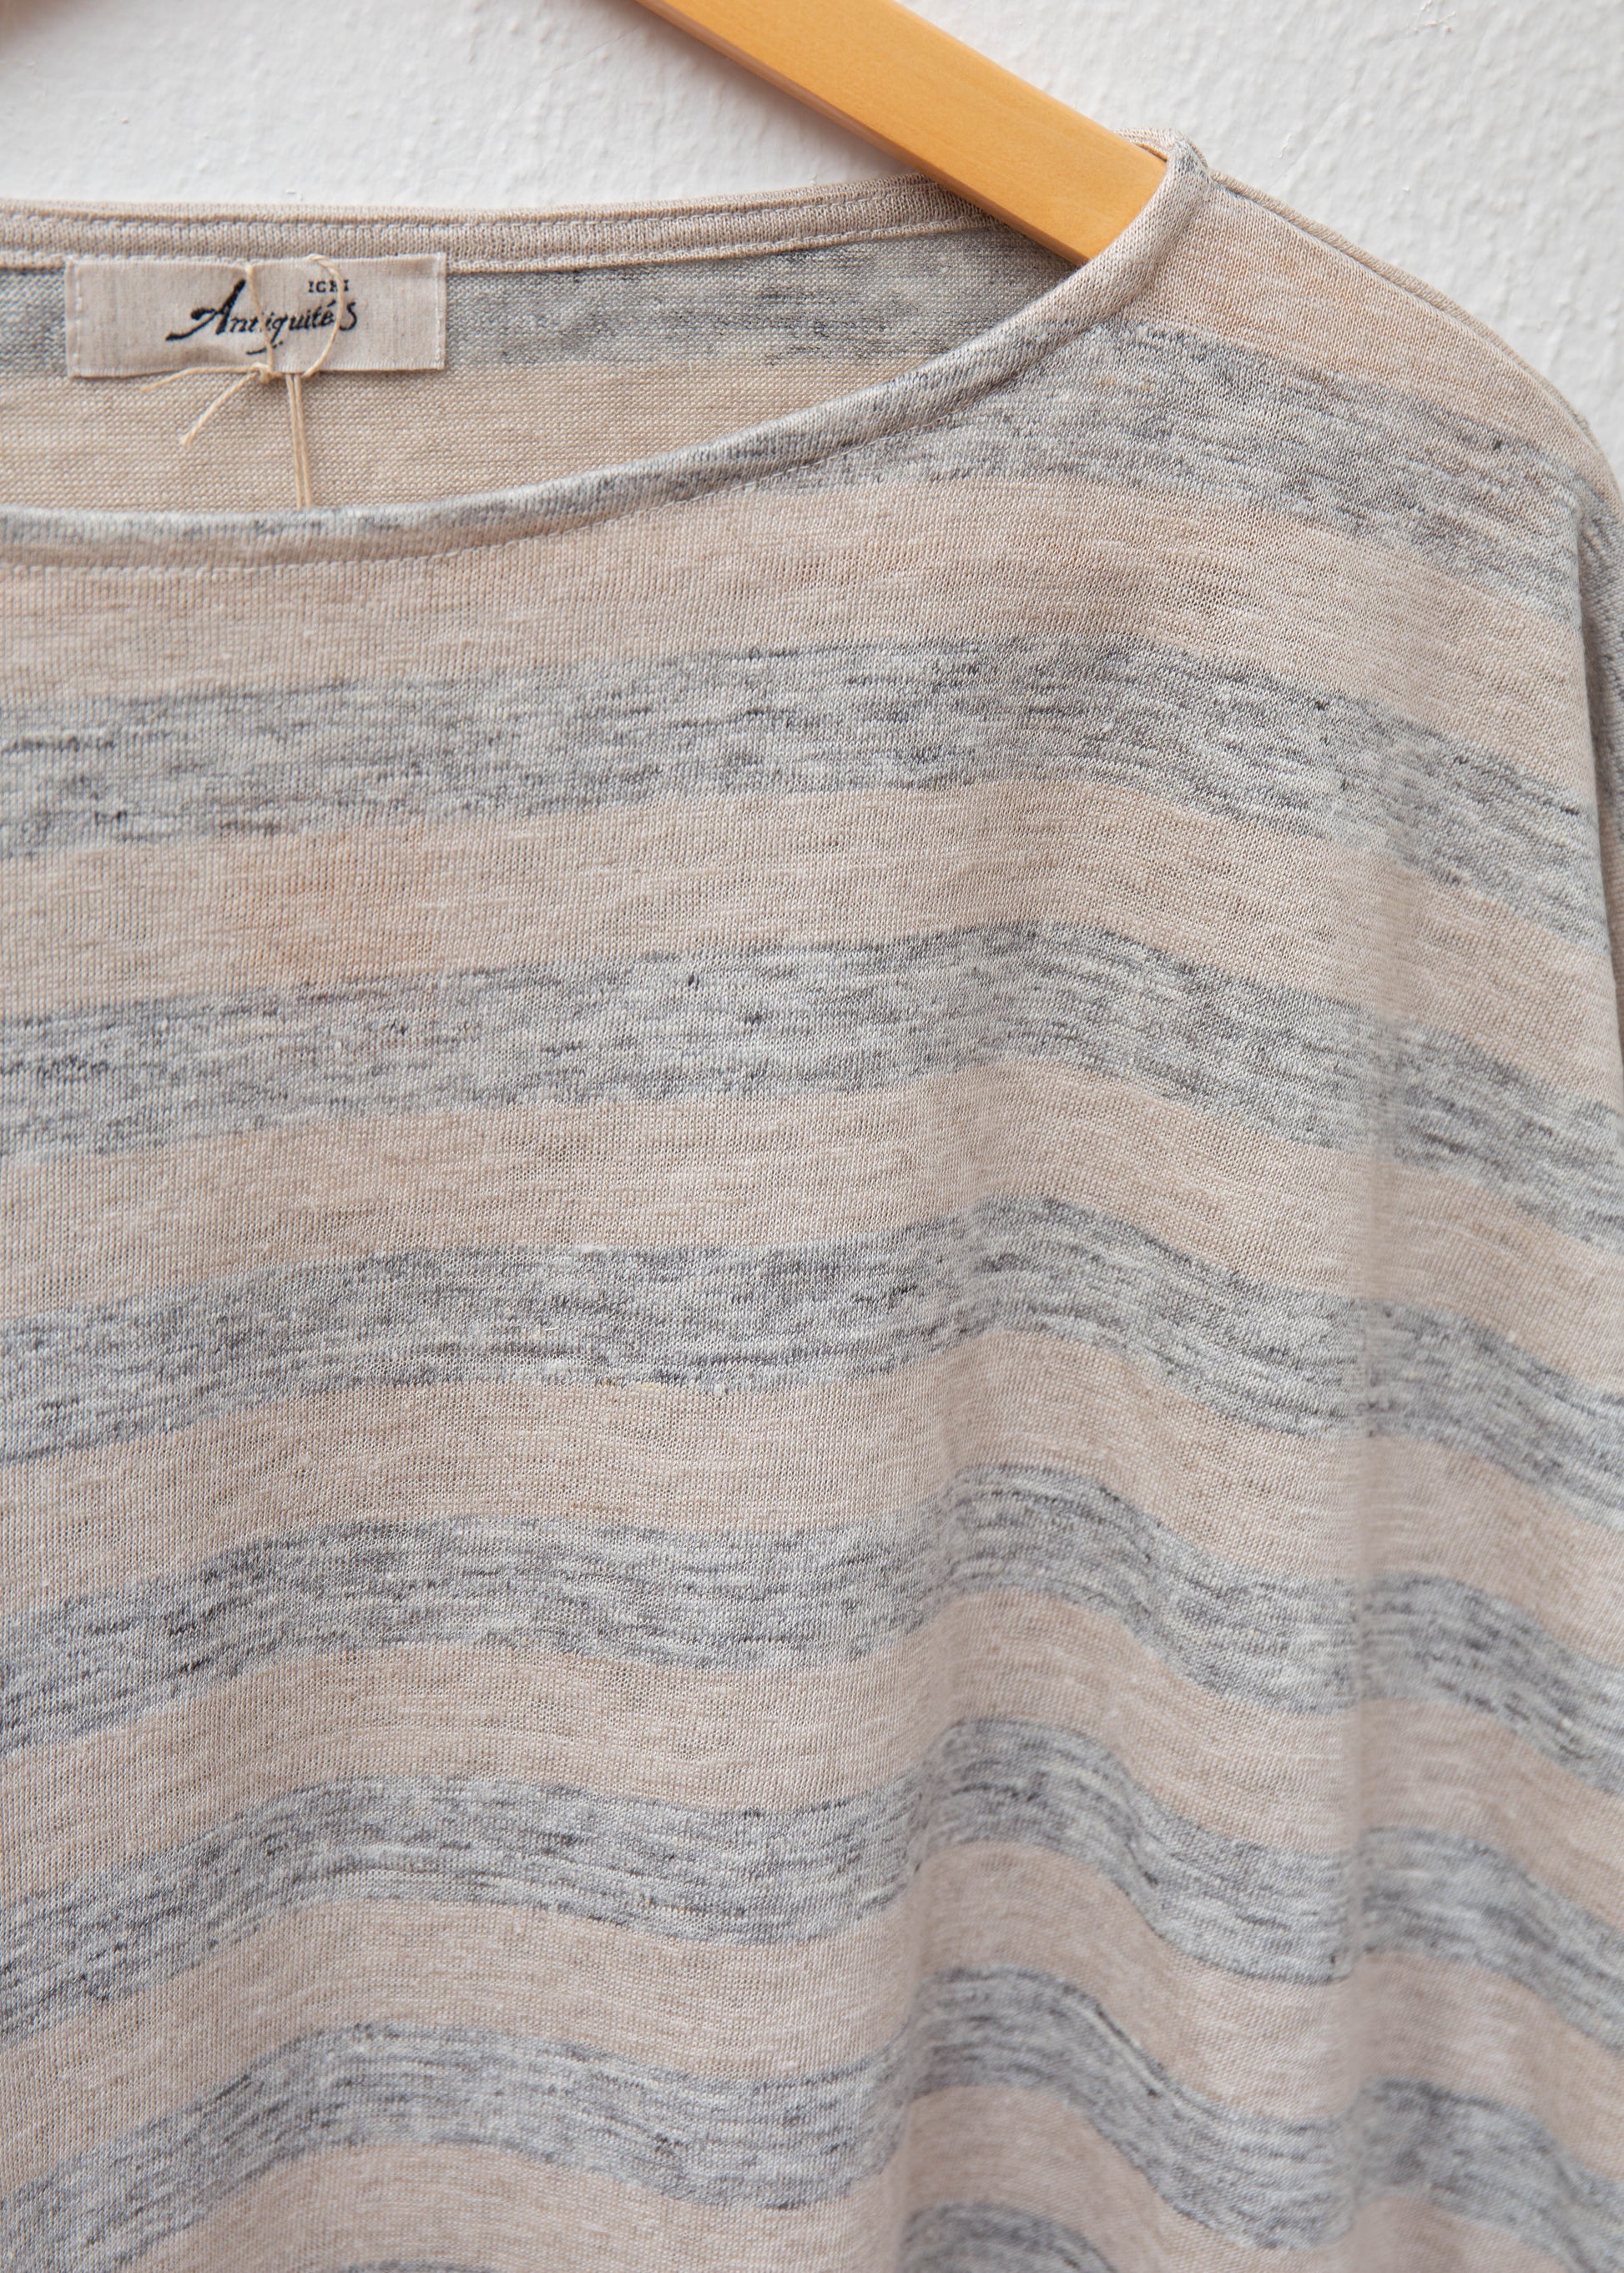 Close up of linen pullover natural/gray fabric